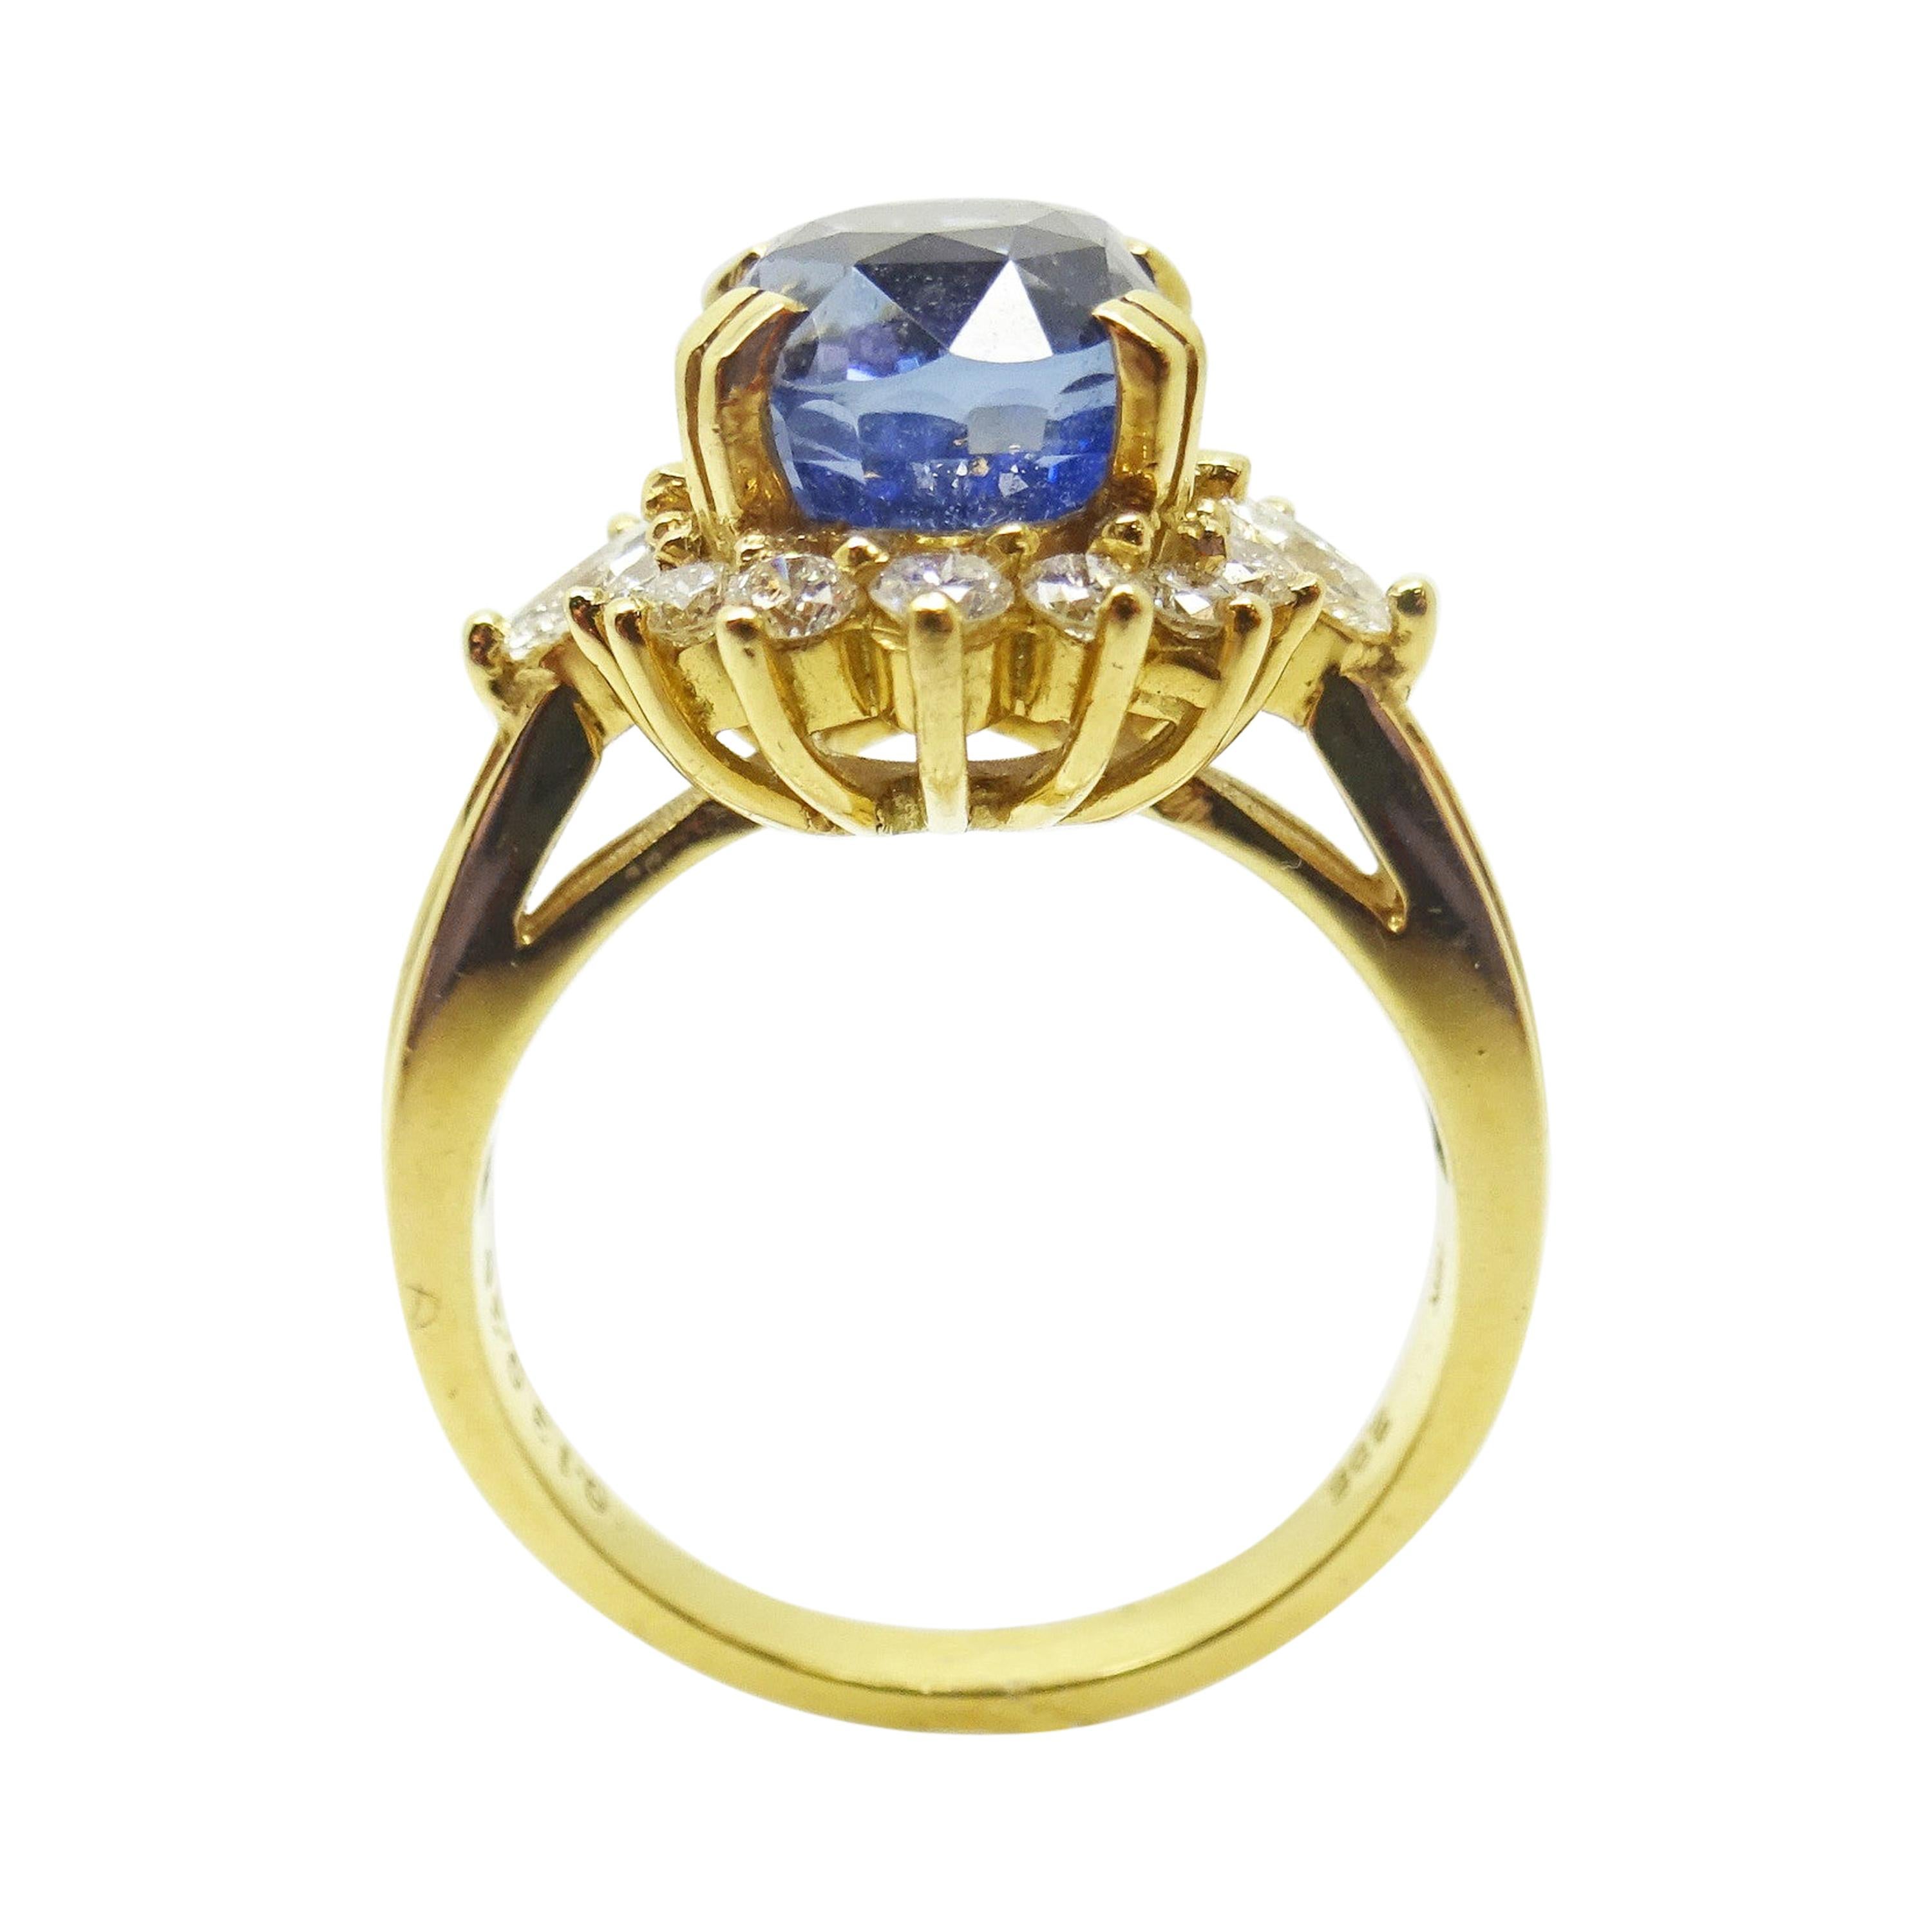 18k Gold 4.34cts Genuine Natural Ceylon Sapphire and Diamond Ring (#J3398)

18k yellow gold ceylon sapphire and diamond ring. This ring features a large oval ceylon blue sapphire weighing approximately 3.85 carats. The sapphire has fine